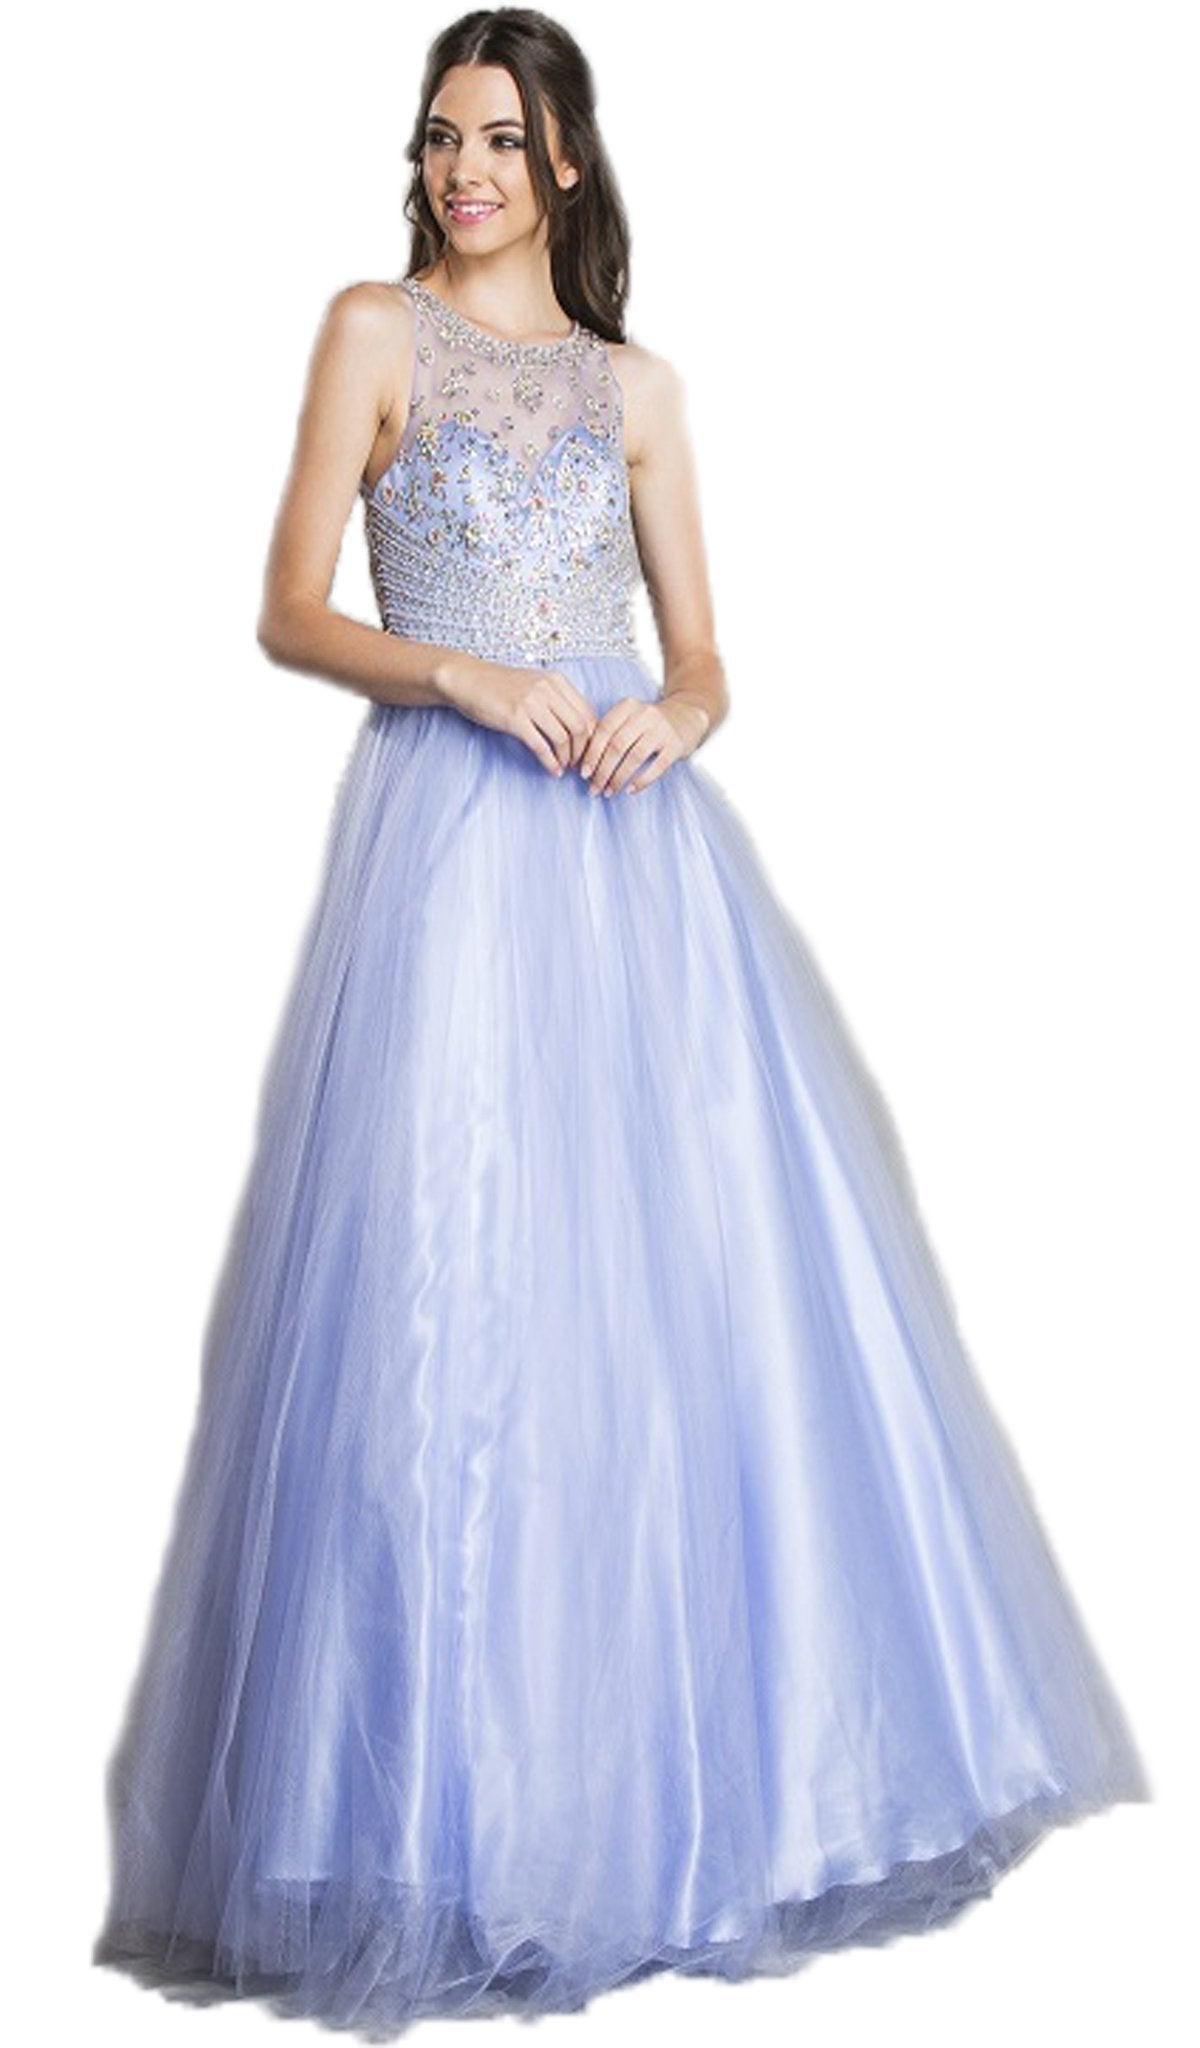 Image of Aspeed Design - Embellished Illusion Jewel Evening Gown